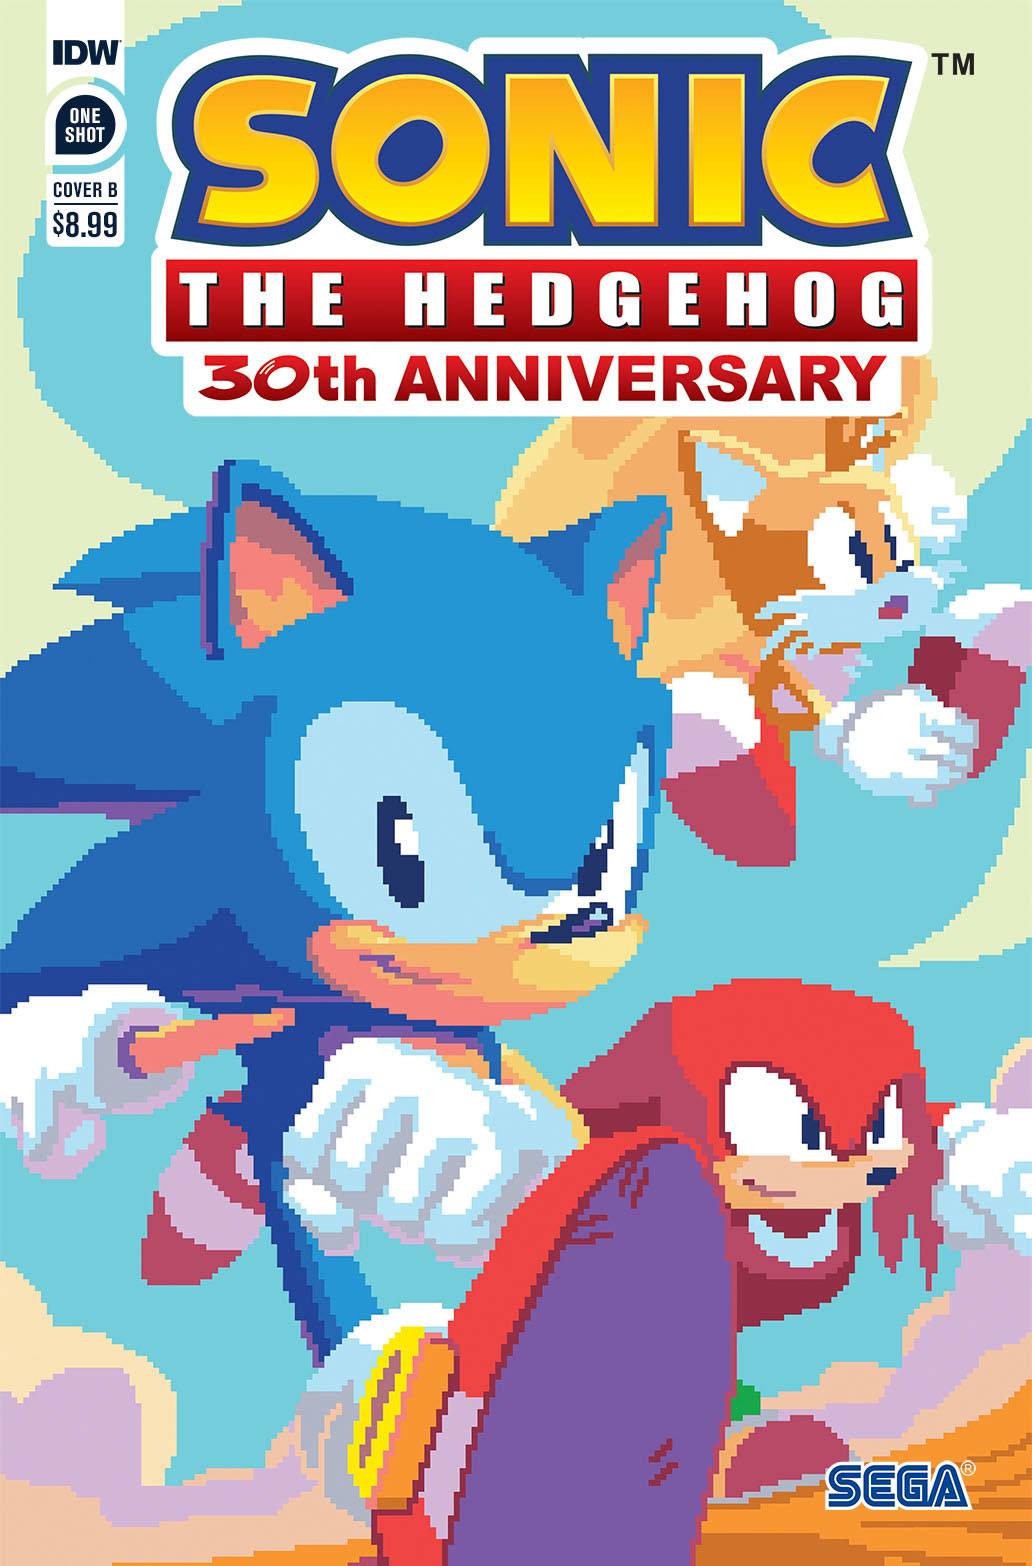 Sonic the Hedgehog 30th Anniversary Special Cover B Neofotistou